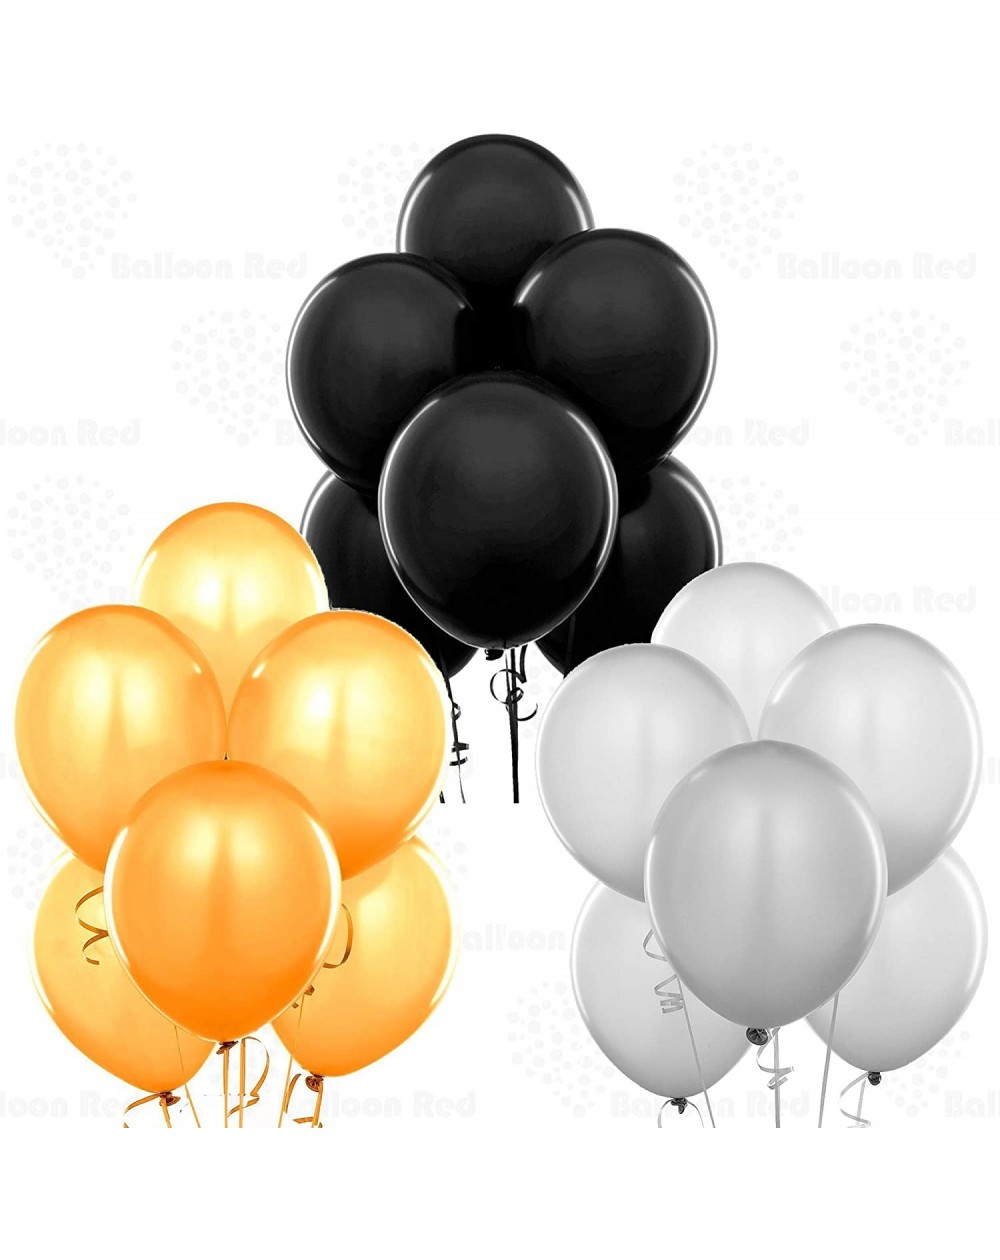 Balloons Gold/Silver/Black 12 Inch Latex Balloons 24 Pack Thickened Extra Strong for Baby Shower Garland Wedding Photo Booth ...